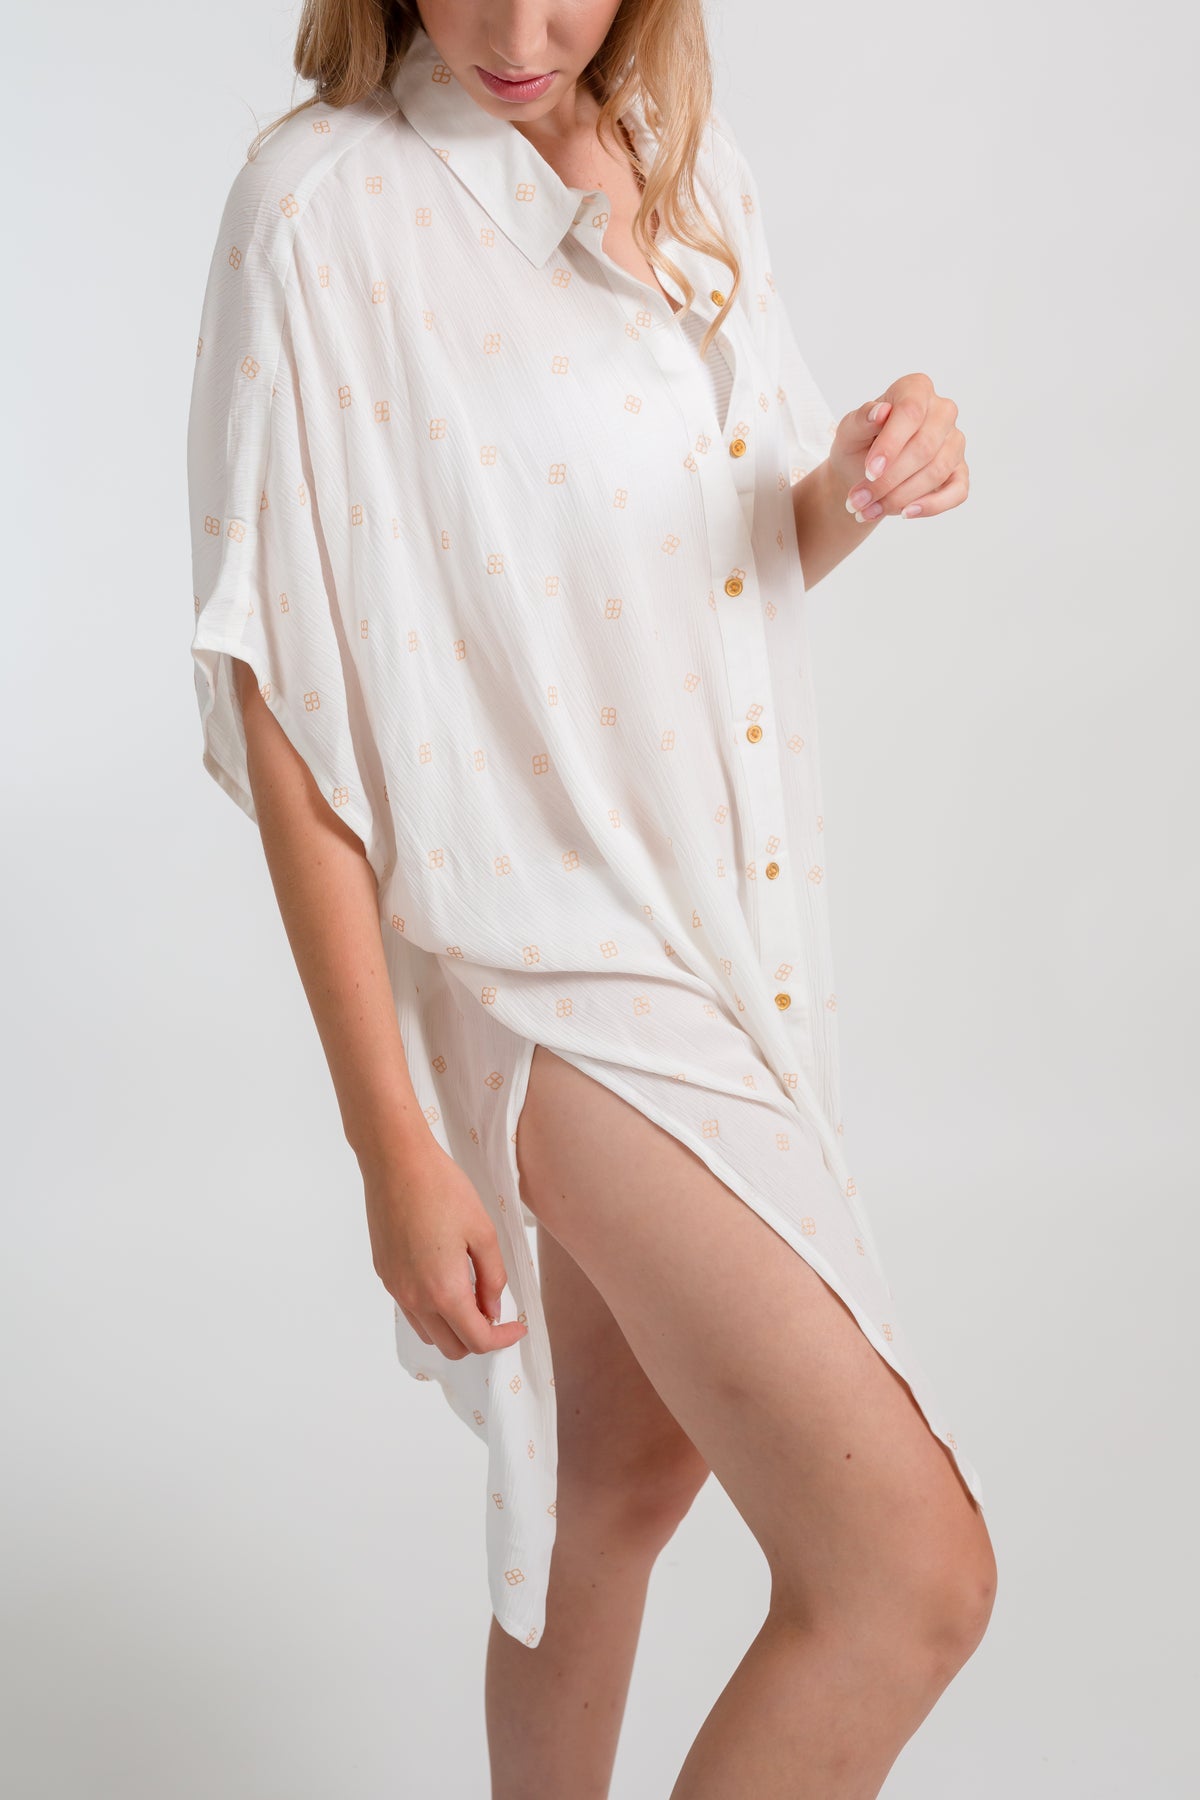 a zoomed in side photo a blonde hair female model wearing a buttoned up shirt dress with a side slit in the color white with gold dot print